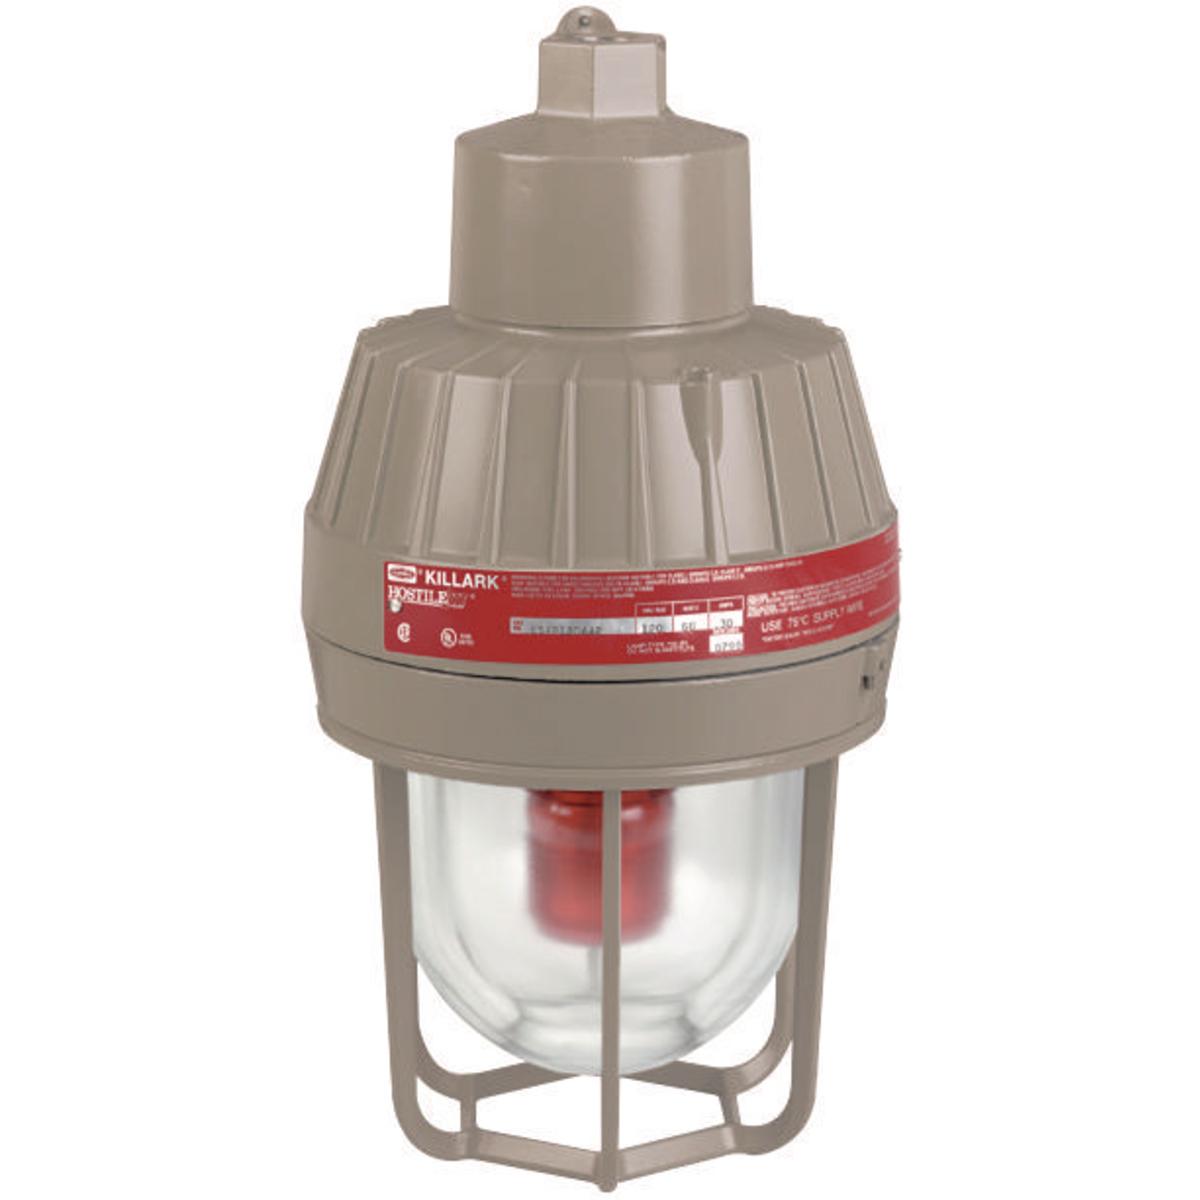 Hubbell ESXR120AA2 120V Red Strobe, 3/4" Pendant  ; Electronic component temperature range –40˚C to +55˚C ; NEC temperature code, T6 ( ; Flash rate–85 flashes per minute ; Xenon type lamp ; Voltage and amperage: 12-74 VDC: Draws 1.25A avg. @ 12 VDC tapering to 0.2A avg. @ 7